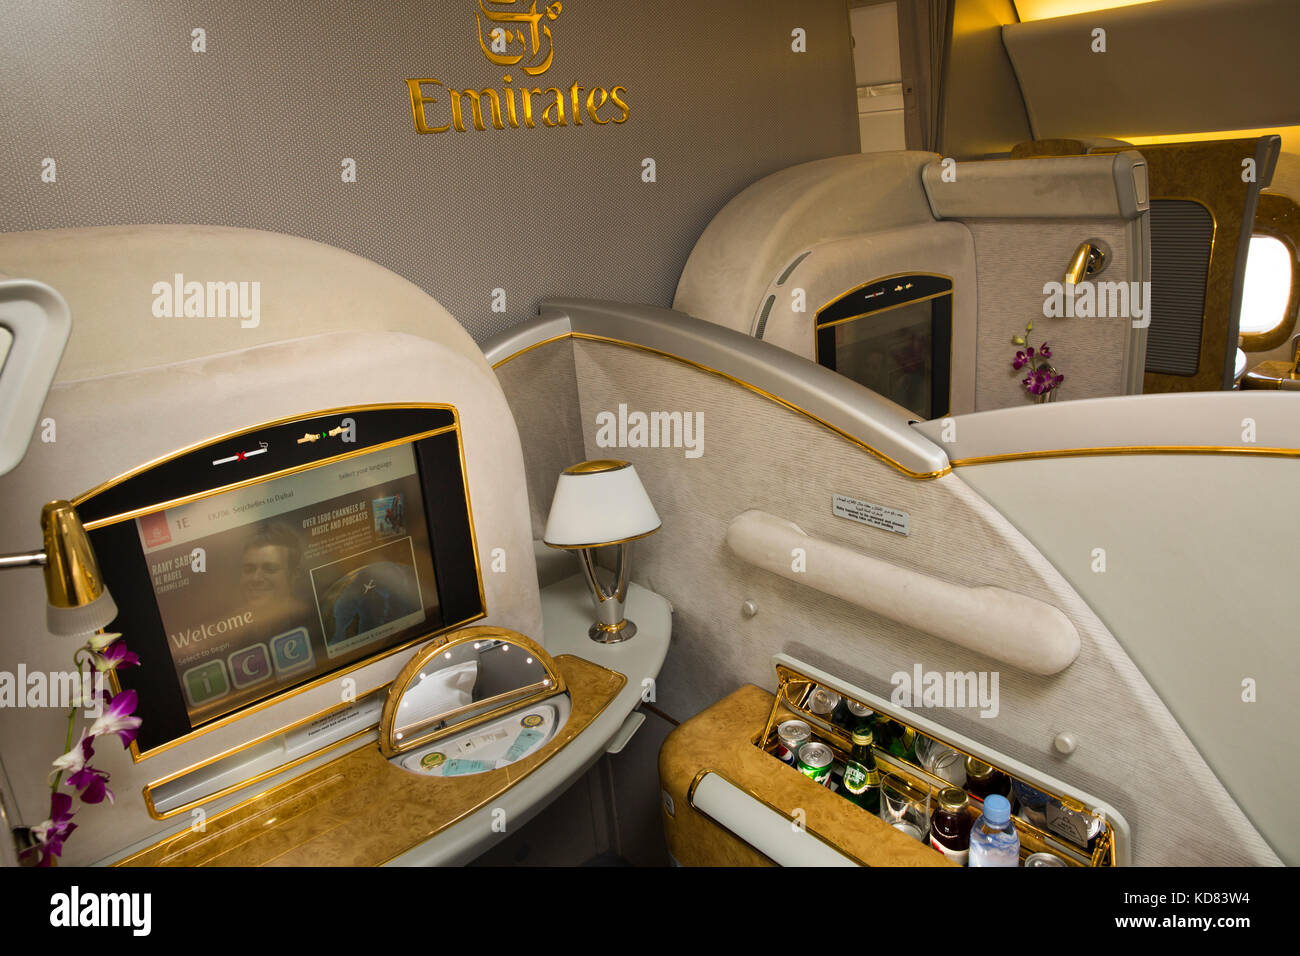 Air Travel Emirates Airline, Boeing 777-300 ER aircraft, First Class cabin suites Stock Photo